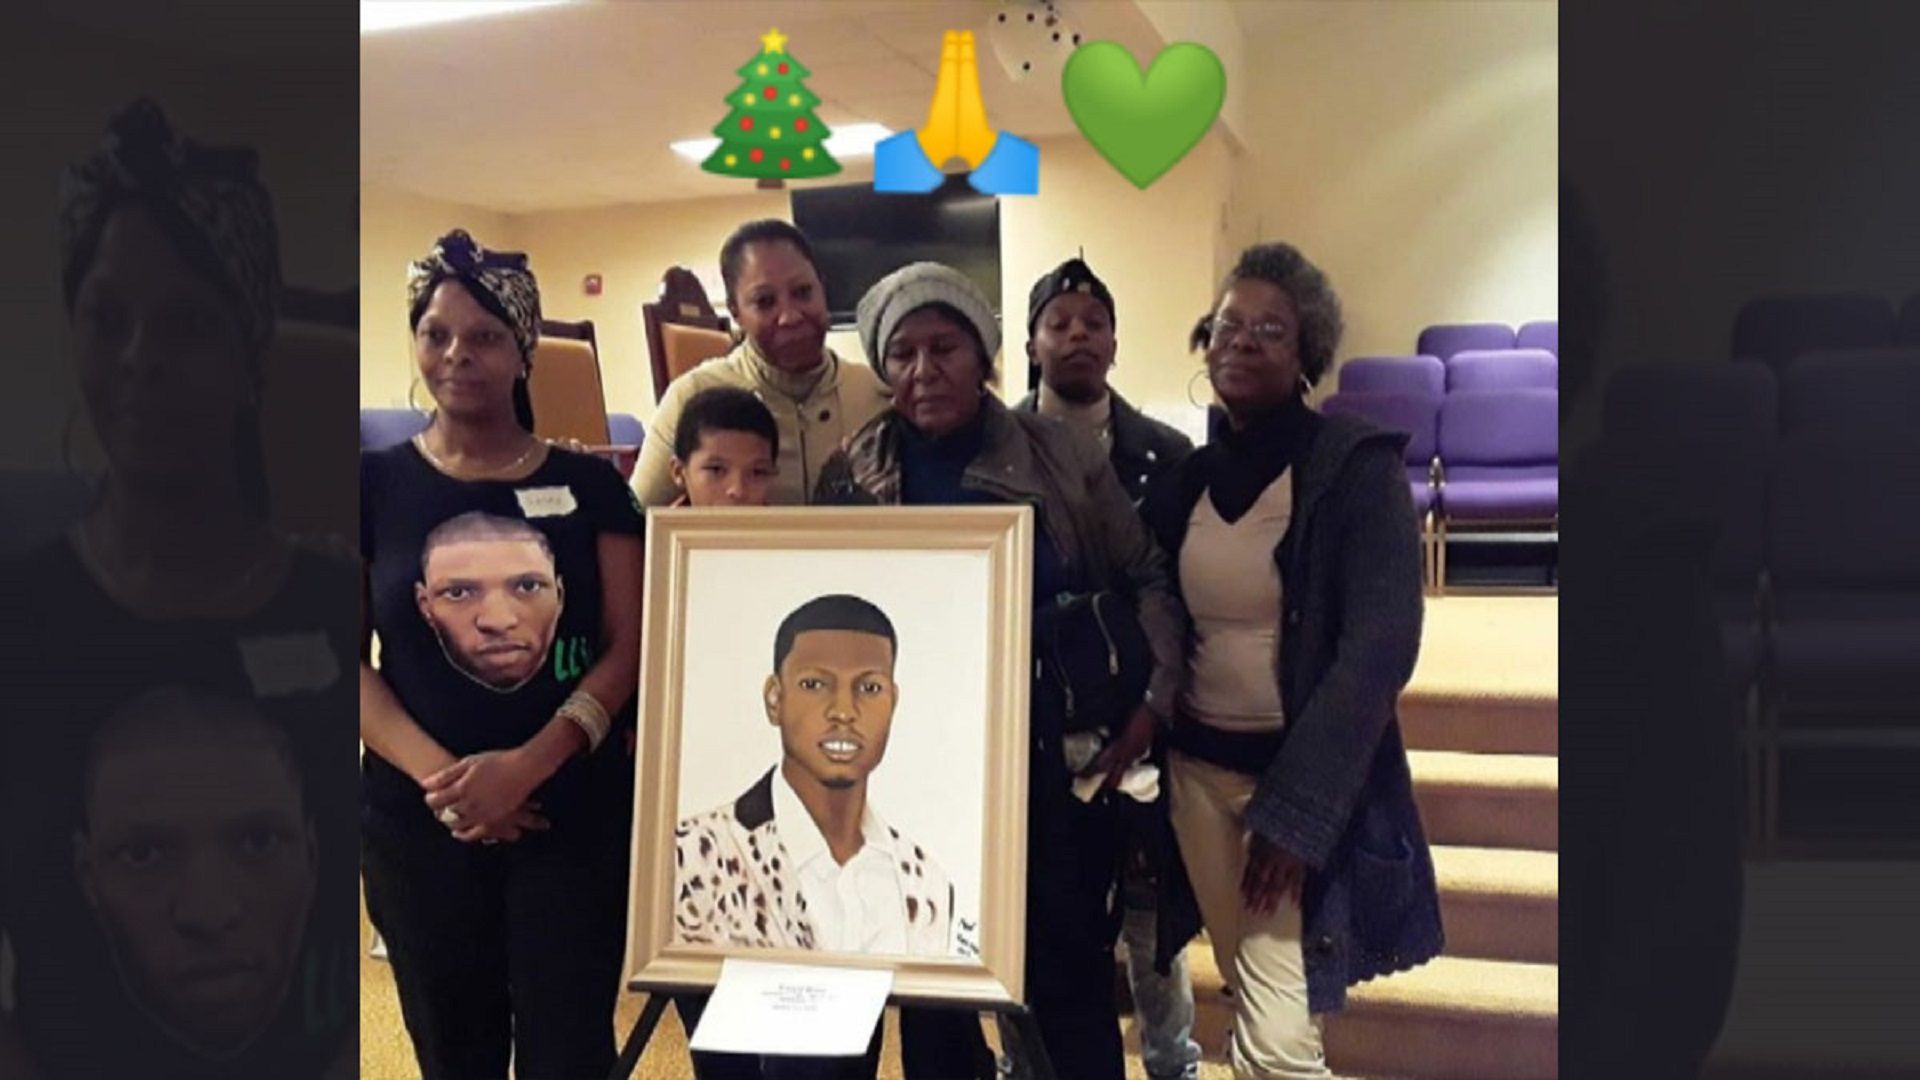 Members of Virgil's family picking up a donated portrait of him this December.